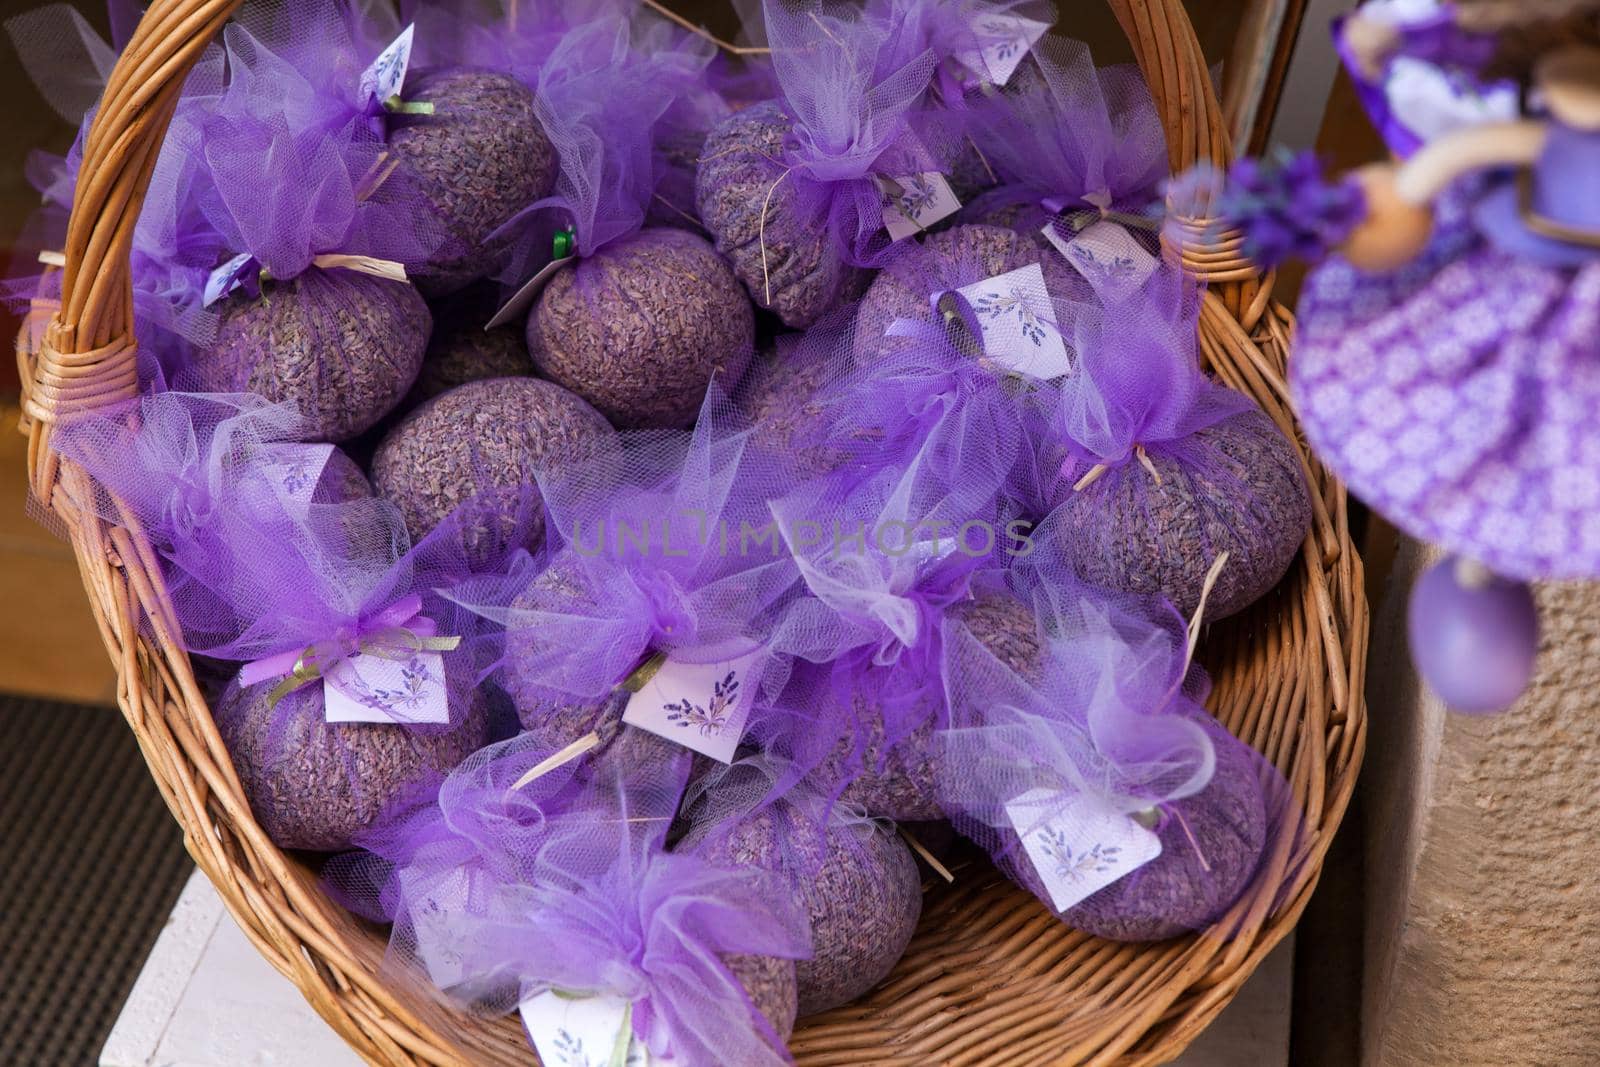 Pouchs with lavender inside a wicker basket